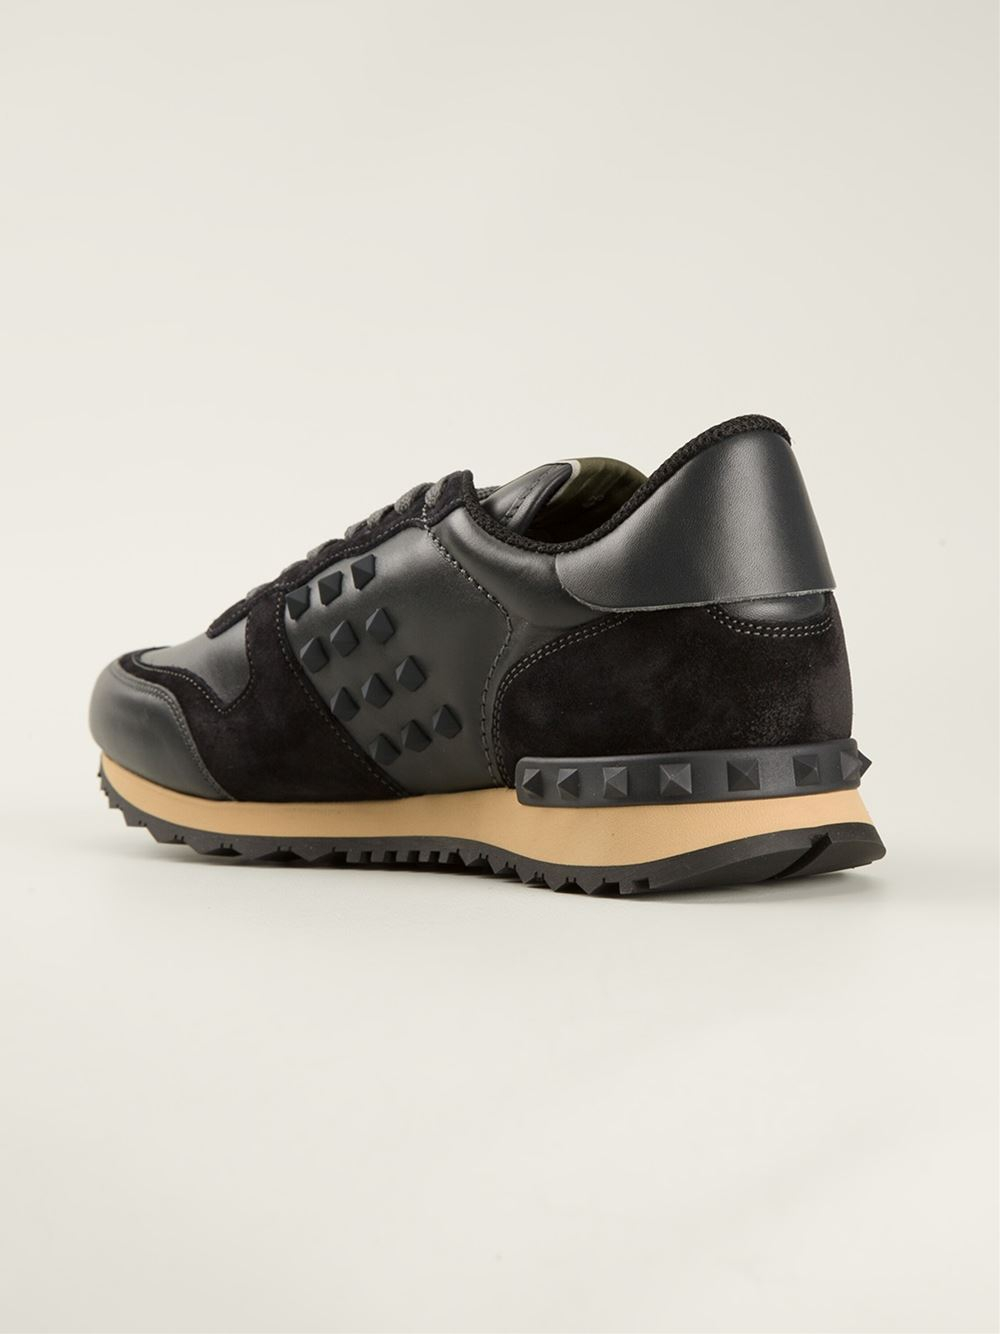 Lyst - Valentino Lace-Up Sneakers in Black for Men